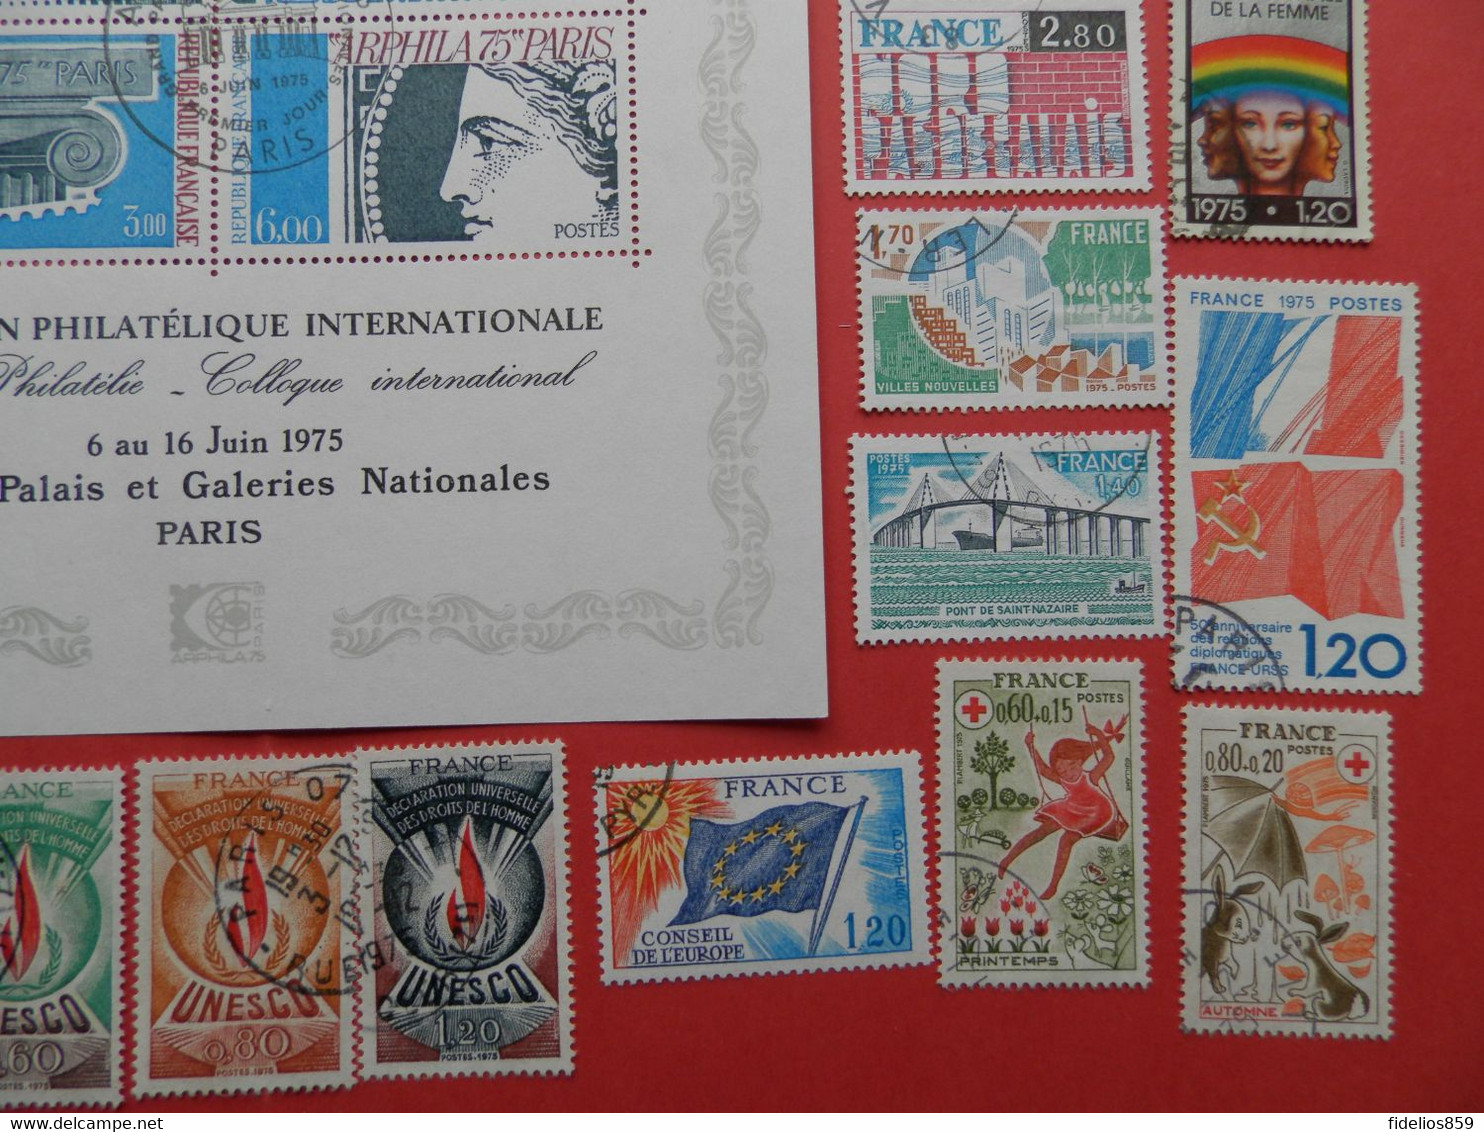 FRANCE OBLITERES LUXE : ANNEE COMPLETE 1975 SOIT 29 TIMBRES POSTE DIFFERENTS + BF 7+ SERVICES 43/48 - 1970-1979